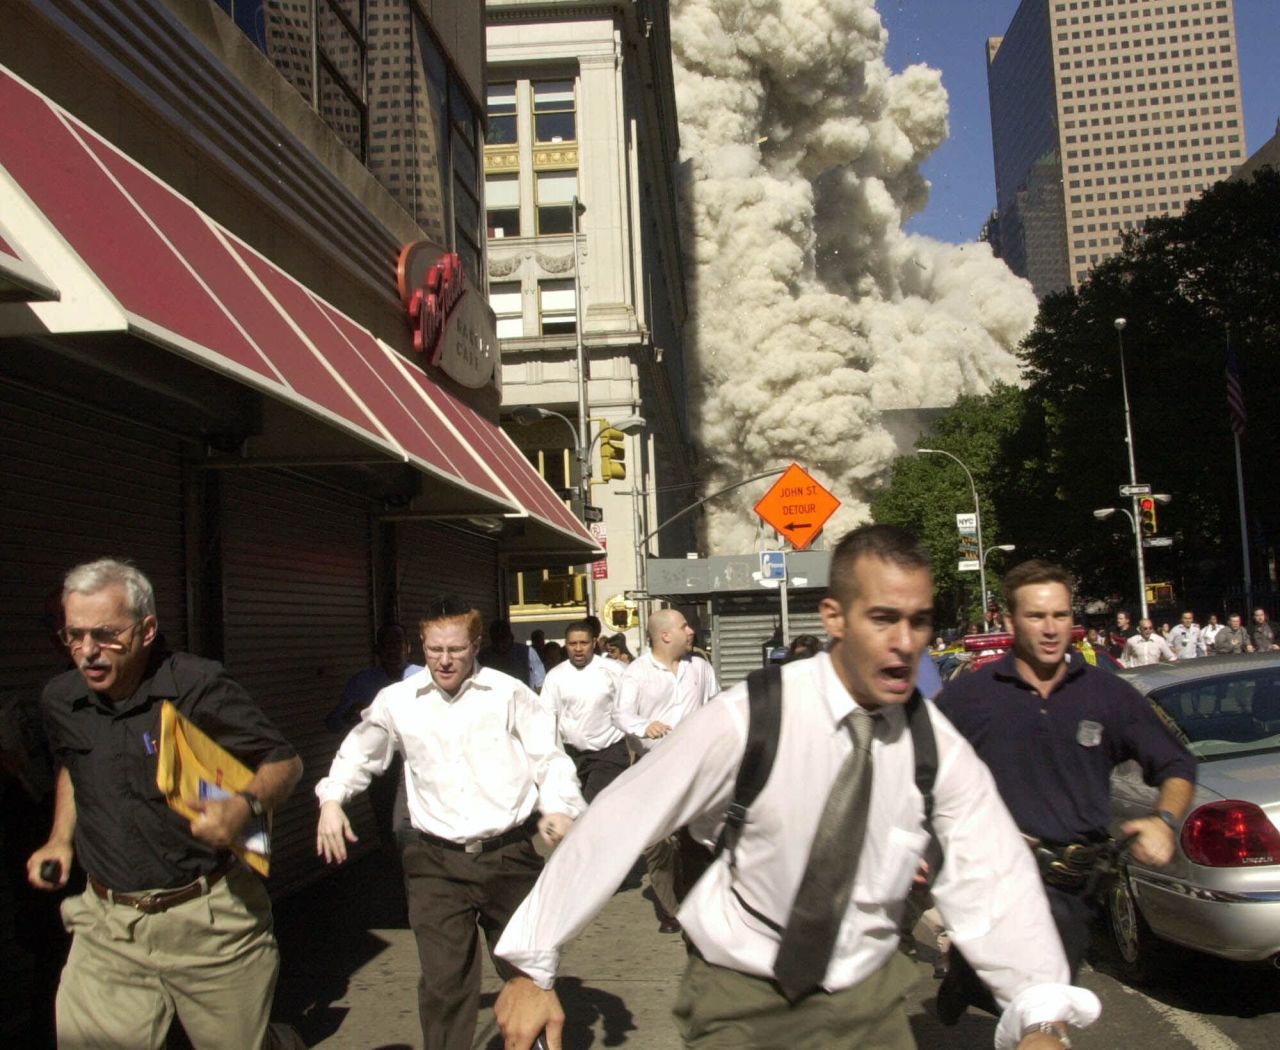 People run as the building collapses.